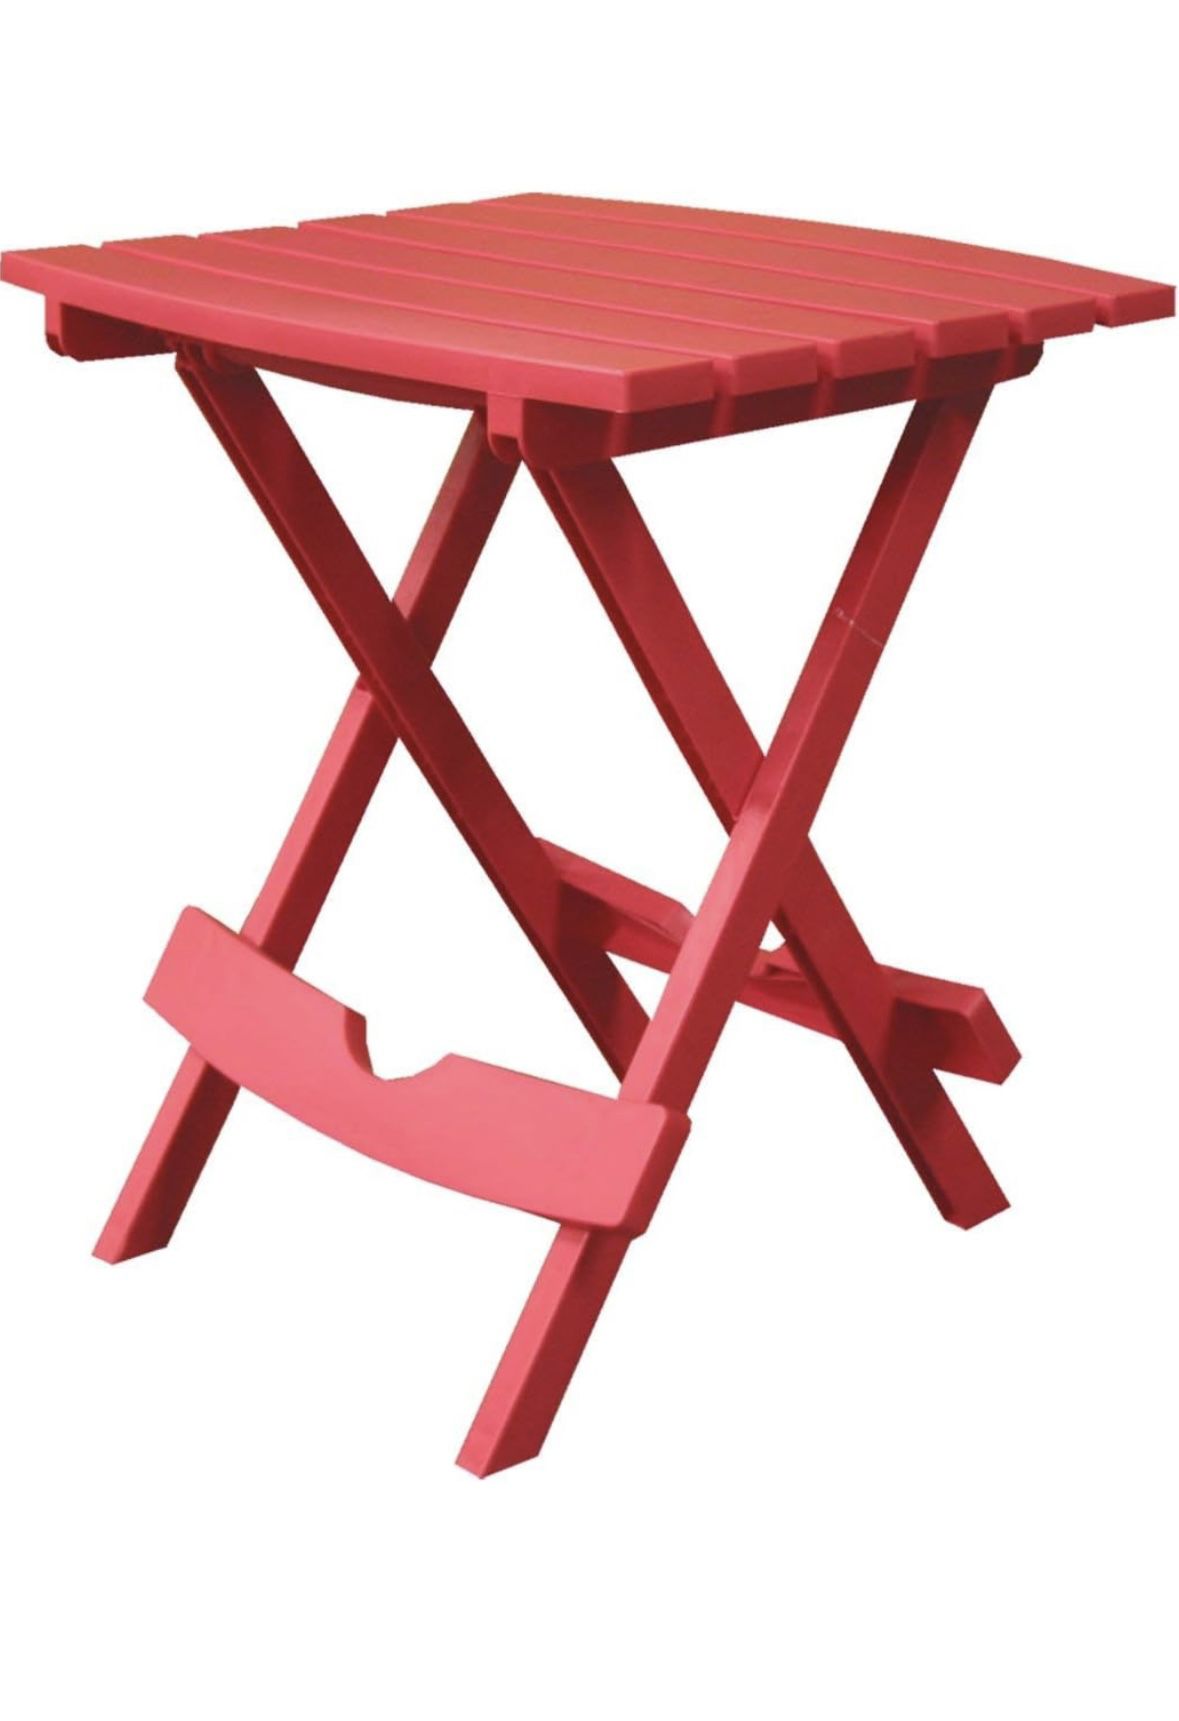 Plastic Quik-Fold Side Table, Cherry Red